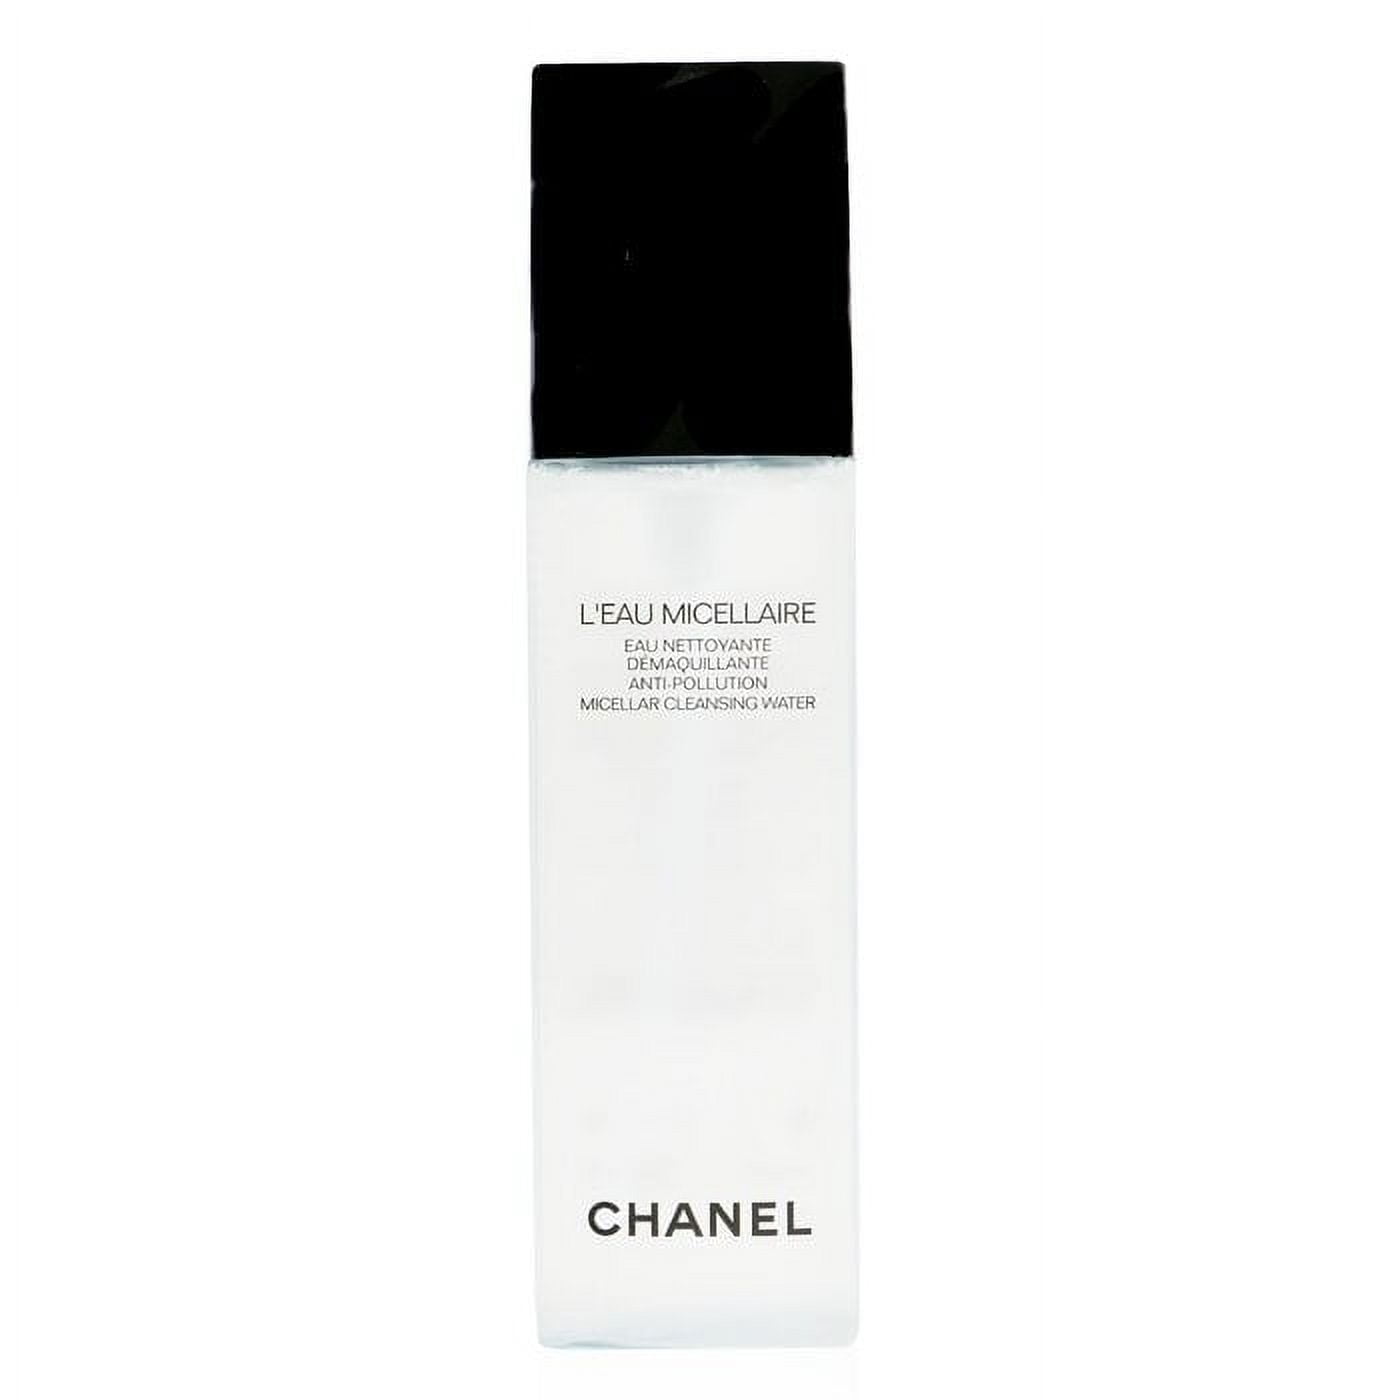 Chanel - L'Eau Micellaire Anti-Pollution Micellar Cleansing Water 150ml/5oz  - Cleansers, Free Worldwide Shipping